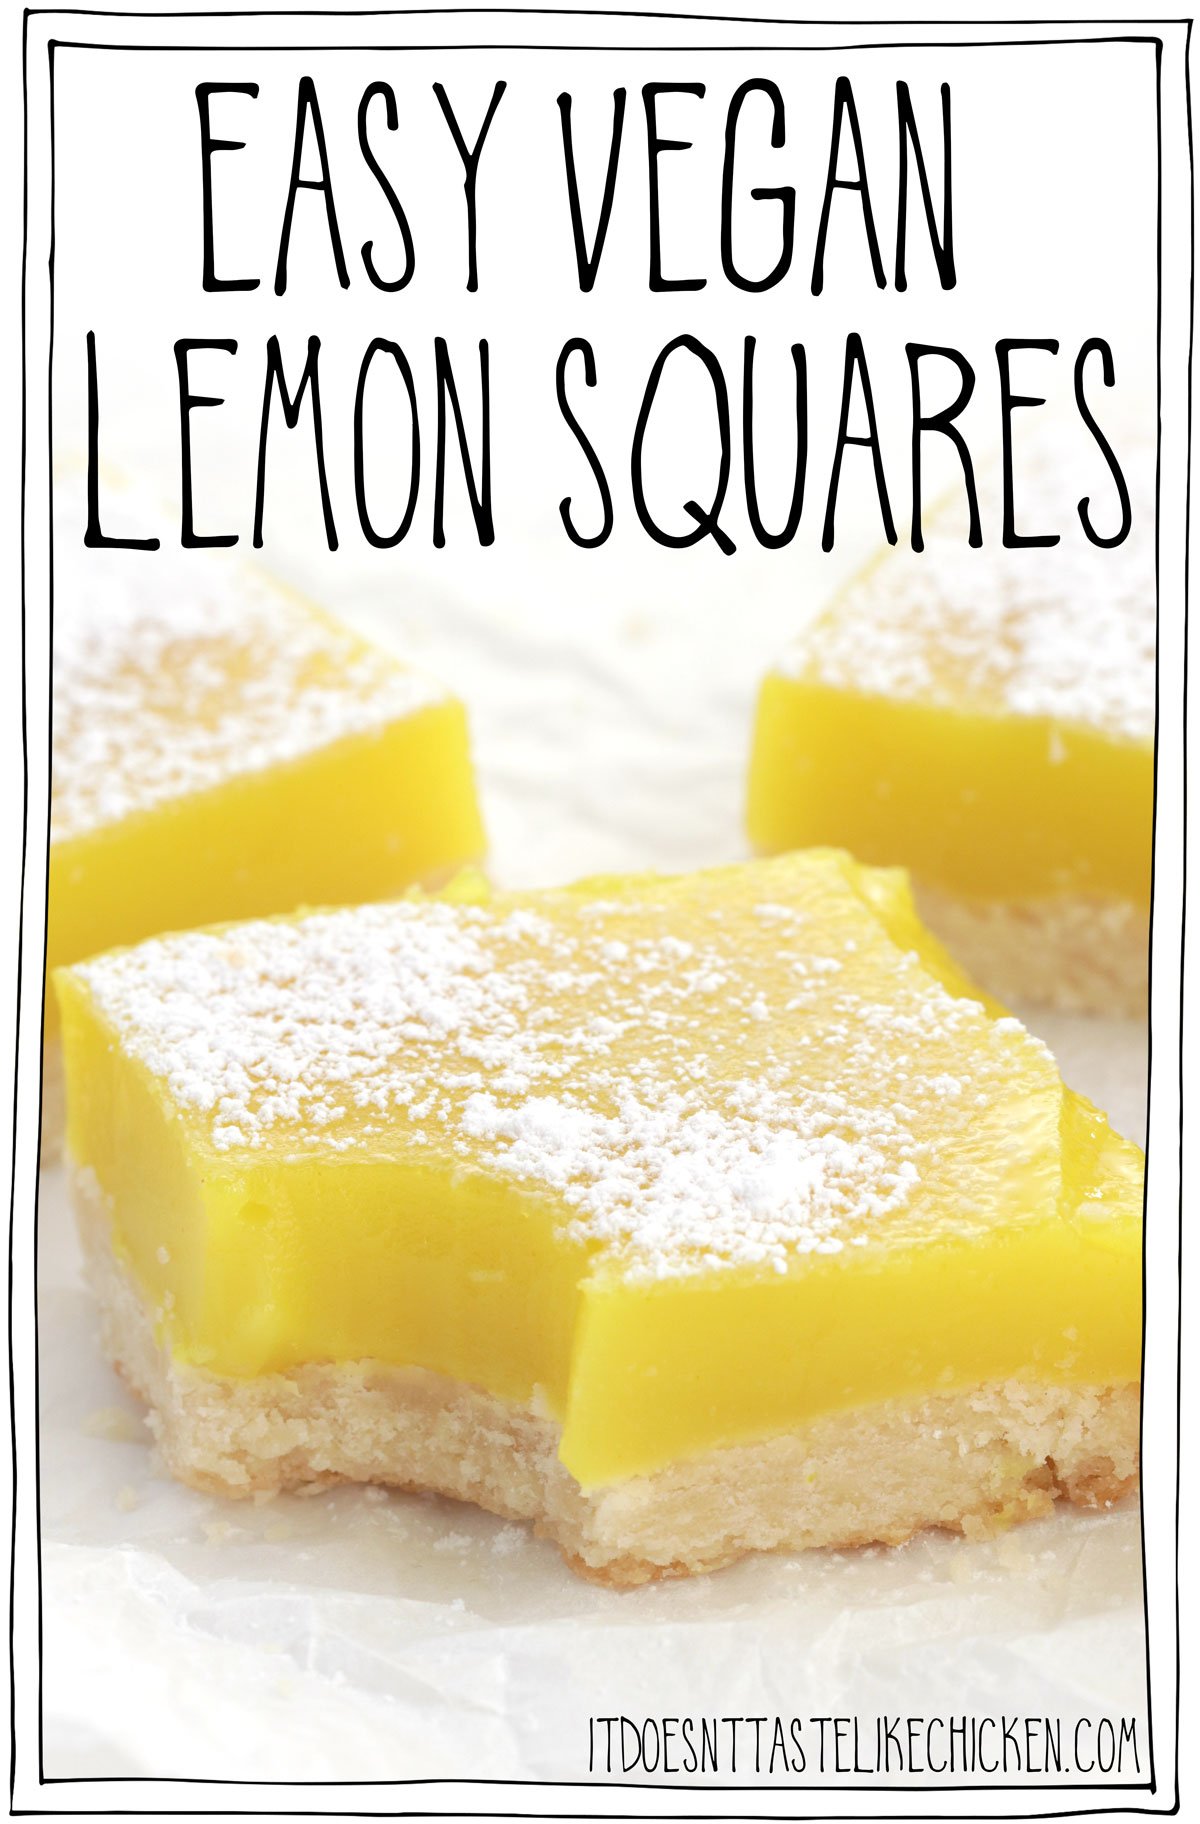 Make these lemon squares ahead of time for your vegan mother's day brunch.